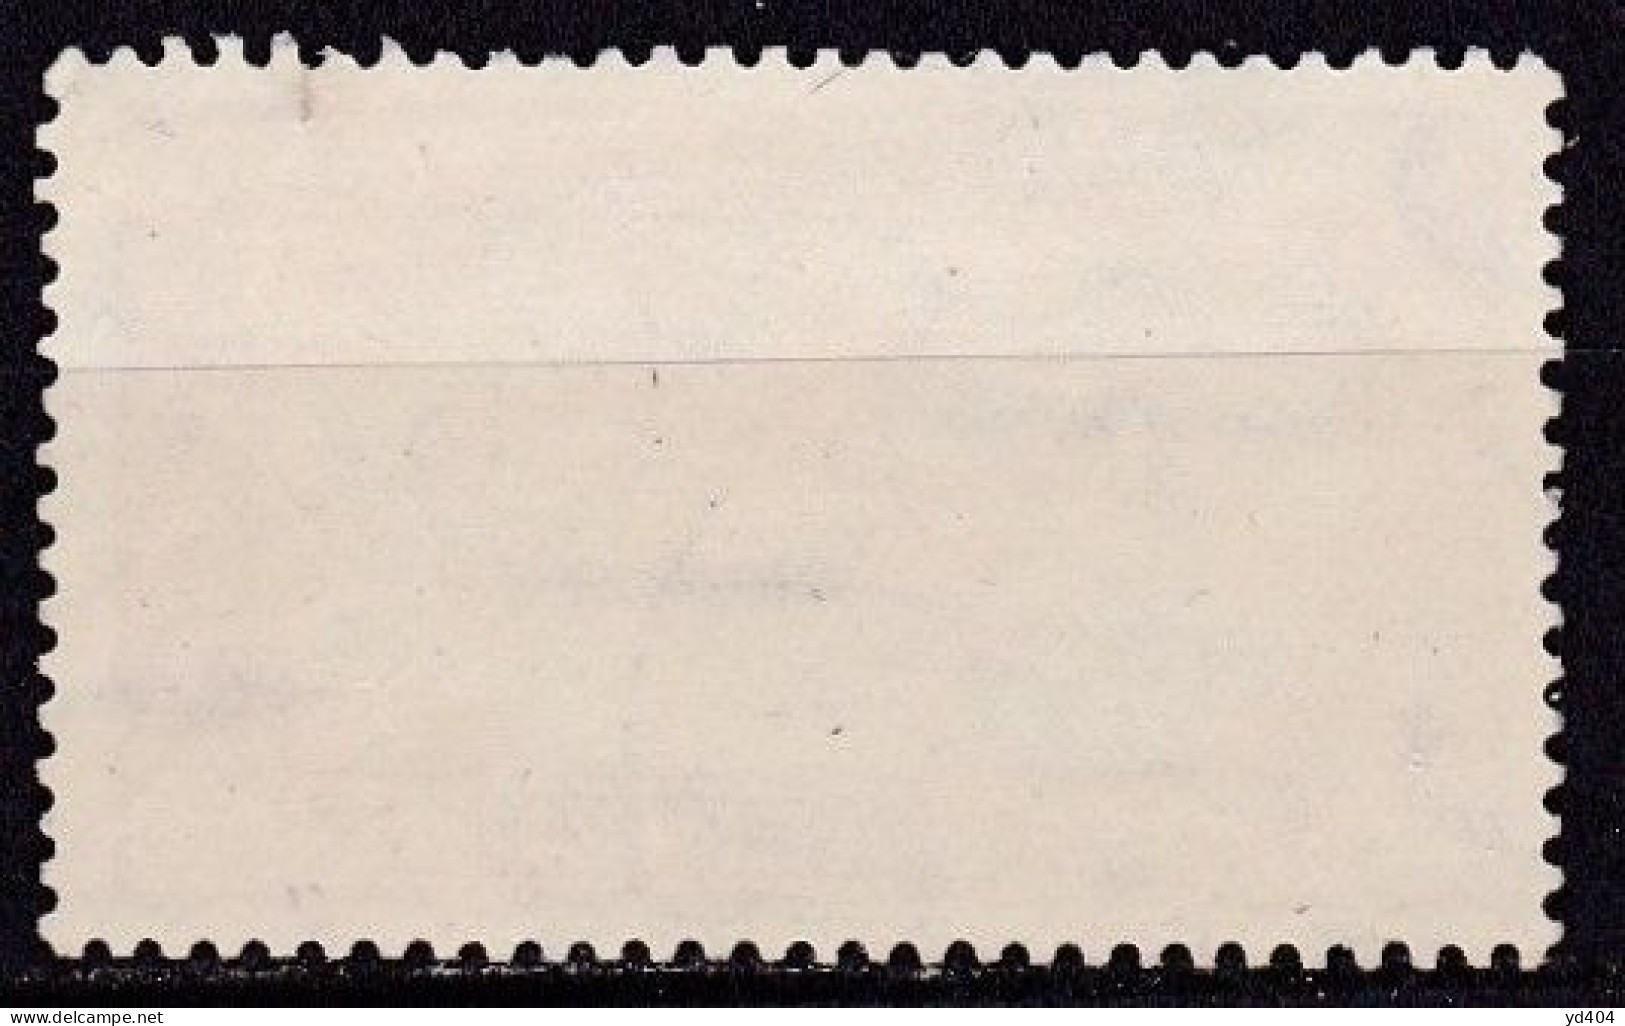 EG407 – EGYPTE – EGYPT – 1929 – AIR MAIL – BAGDAD-CAIRO AIRLINE –Y&T # 2 USED - Poste Aérienne